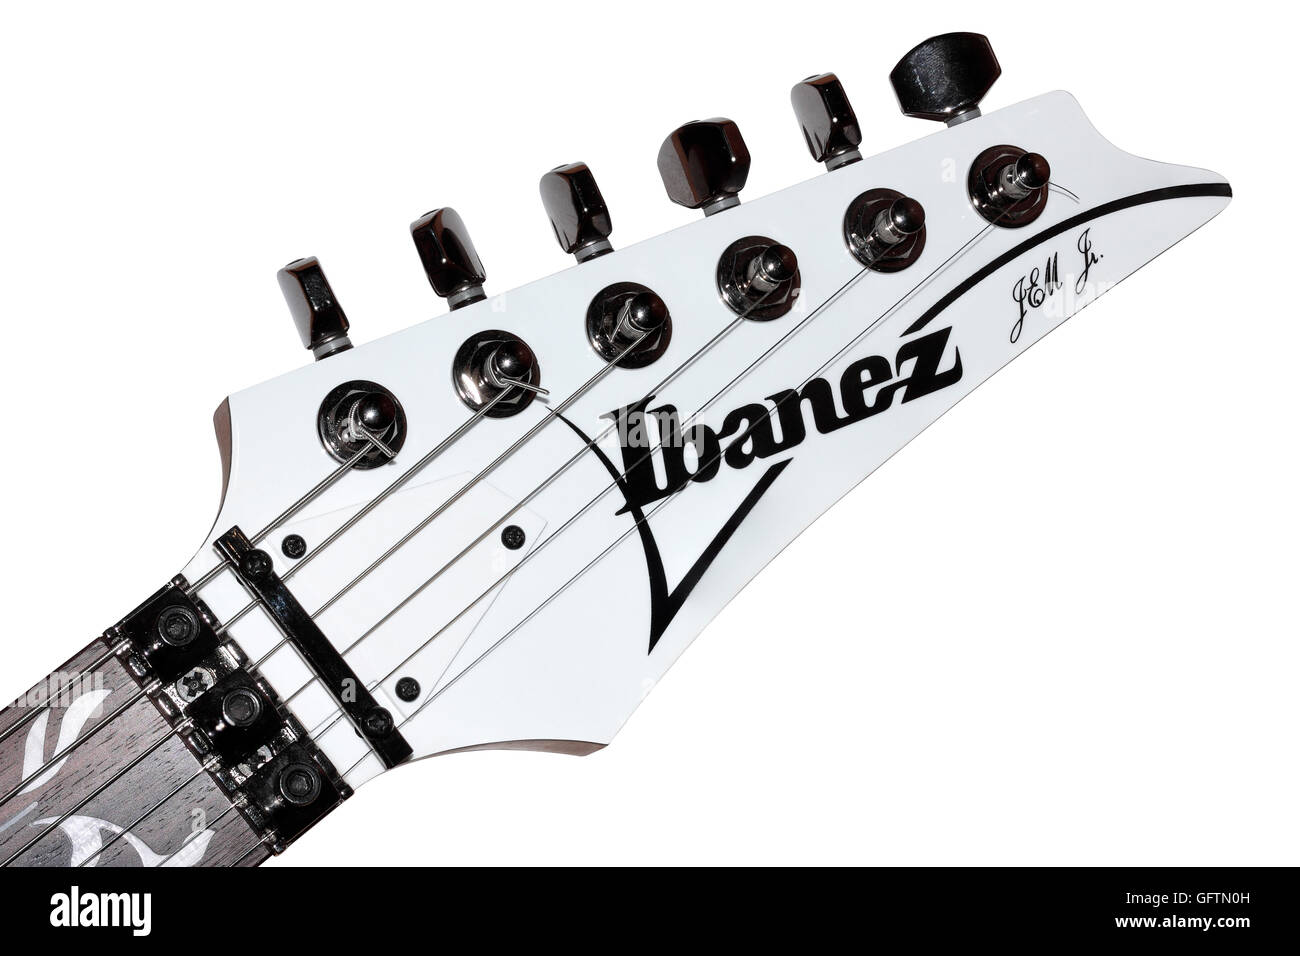 A White Ibanez Jem Jnr electric superstrat guitar Head Stock isolated on a white background Stock Photo